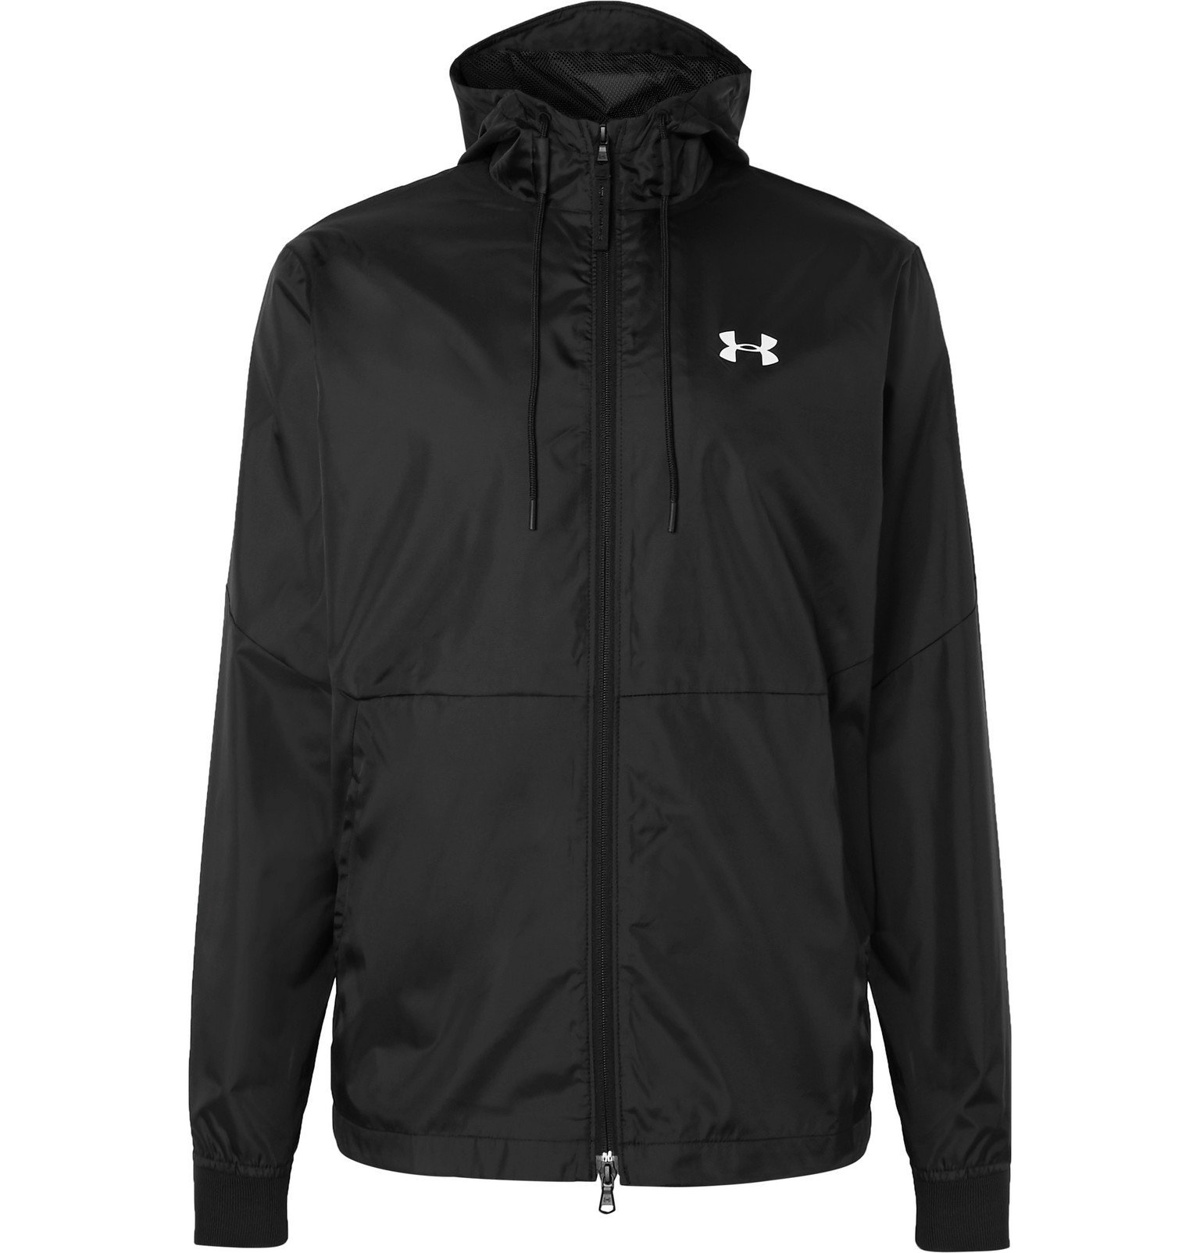 Under Armour - Field House Hooded Shell Jacket - Black Under Armour